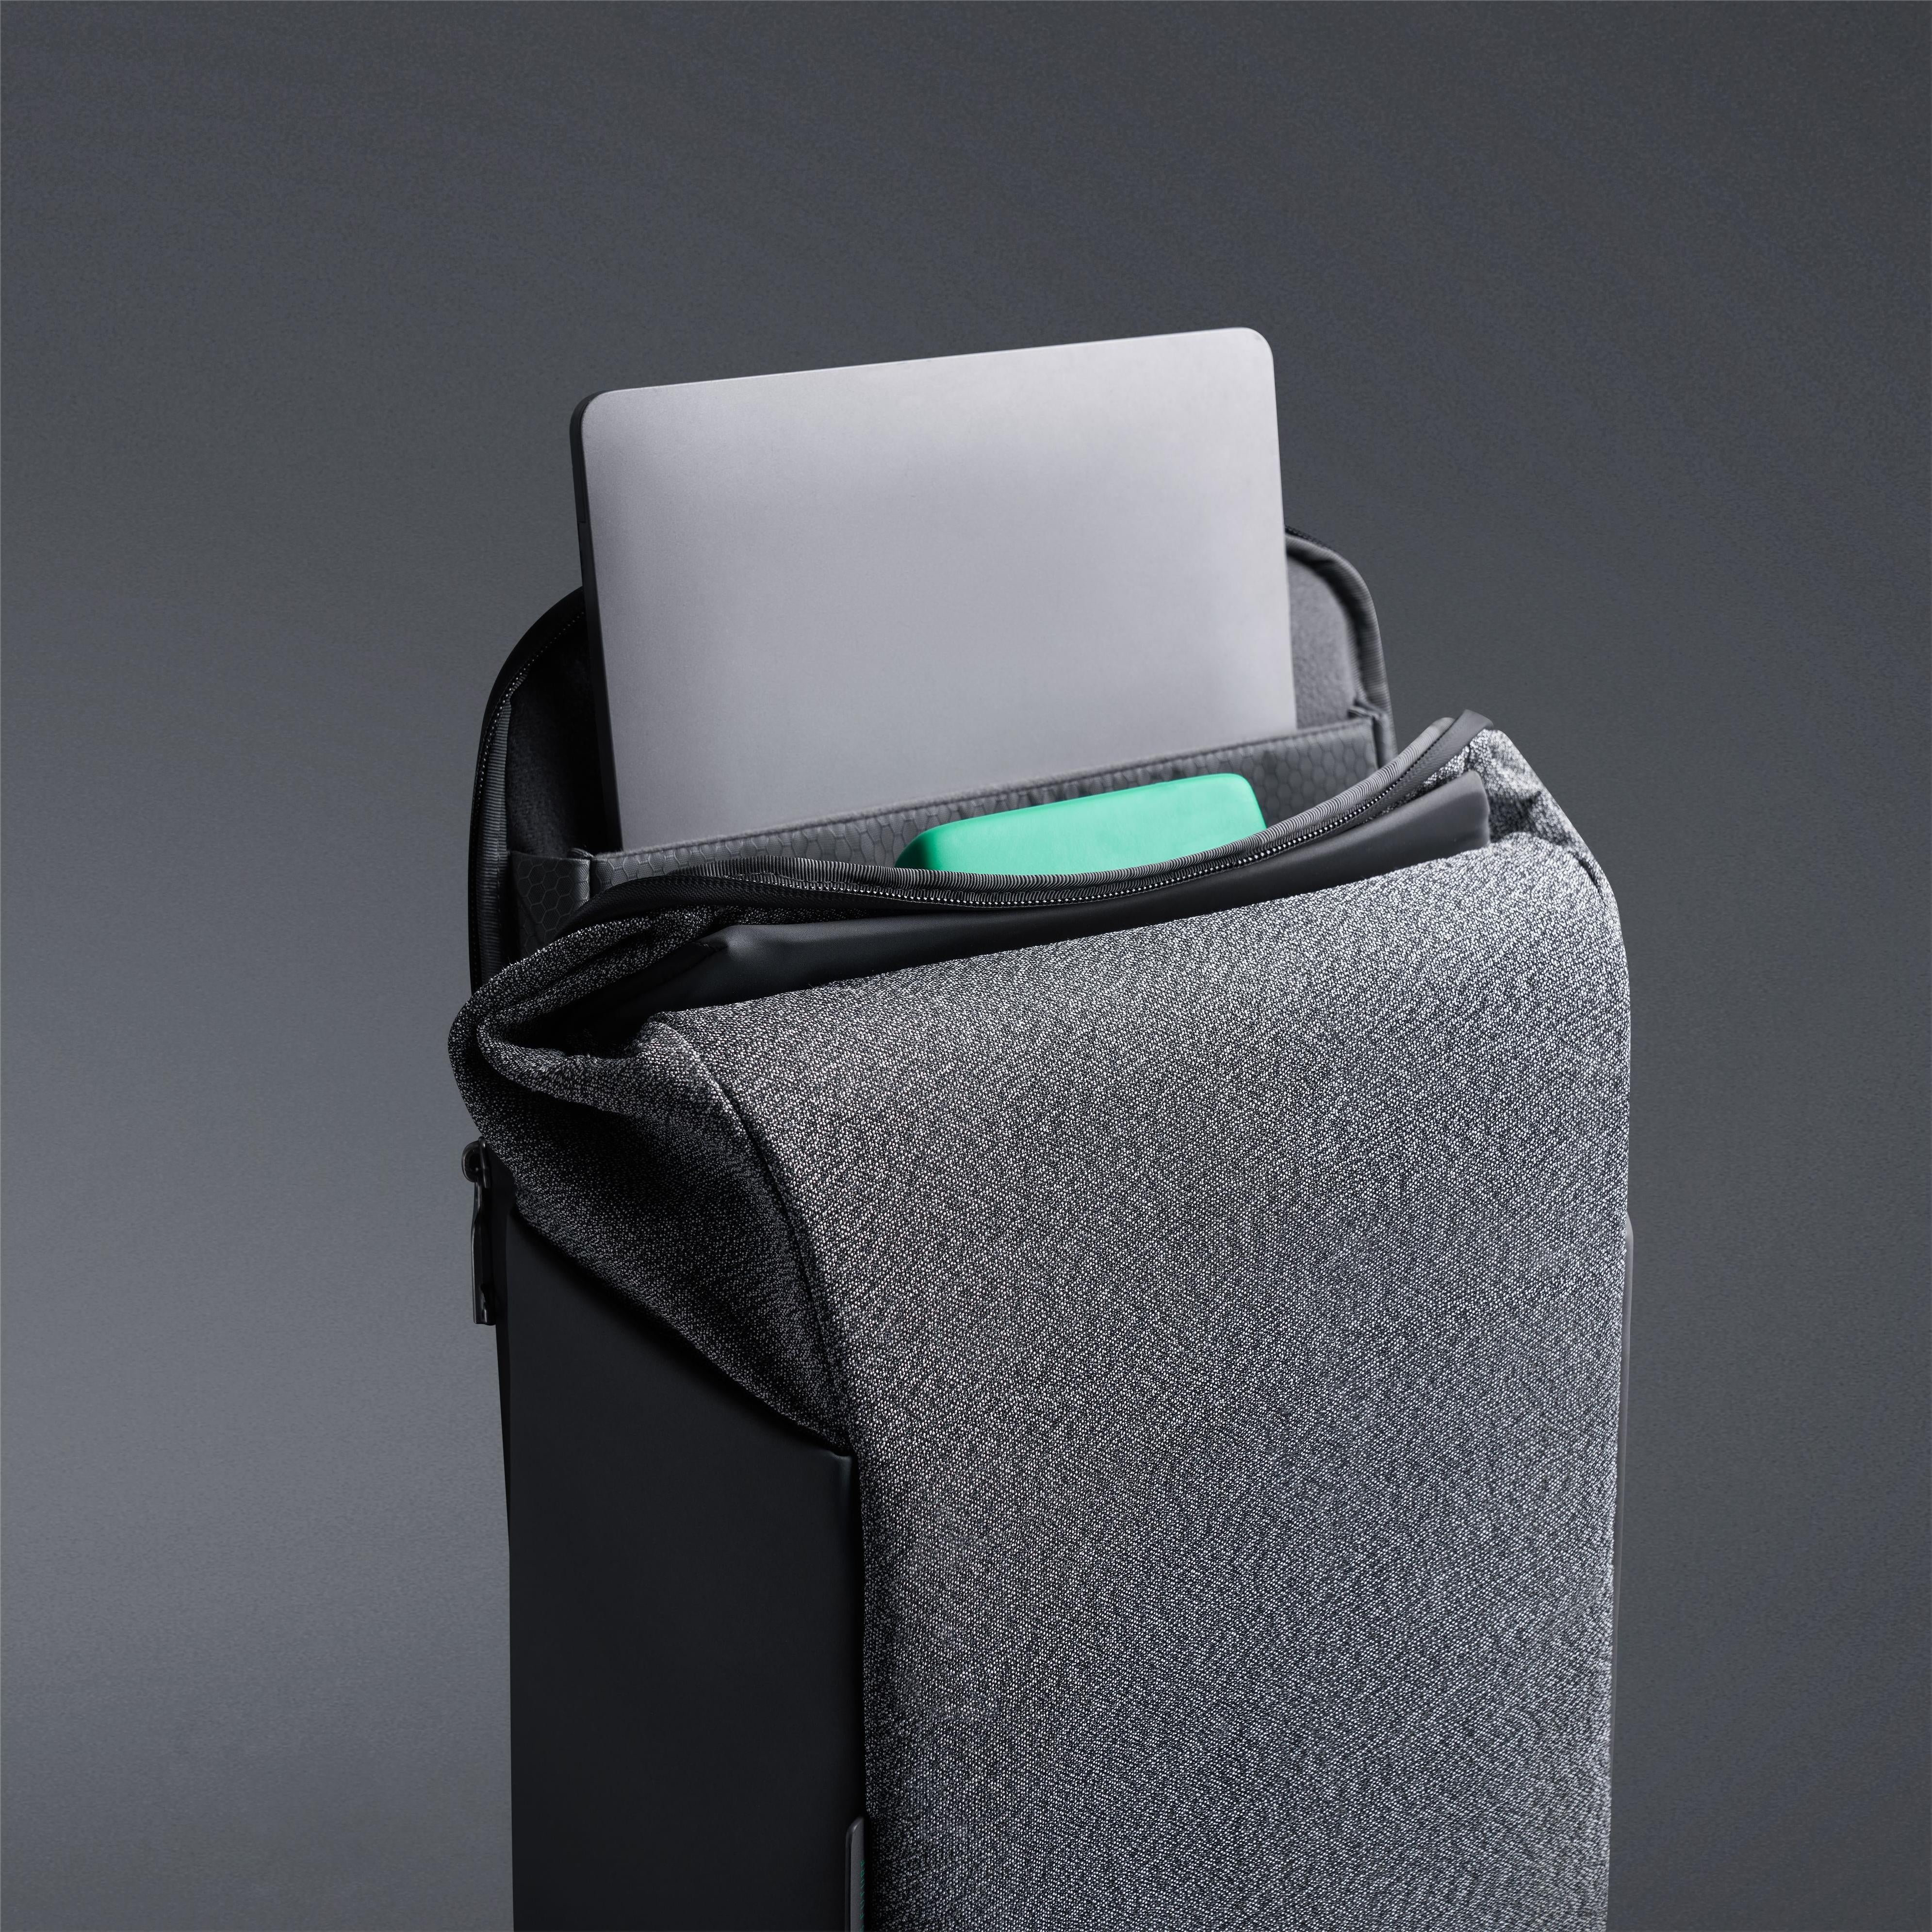 SnapPack | Travel, Urban Commute & Anti-Theft